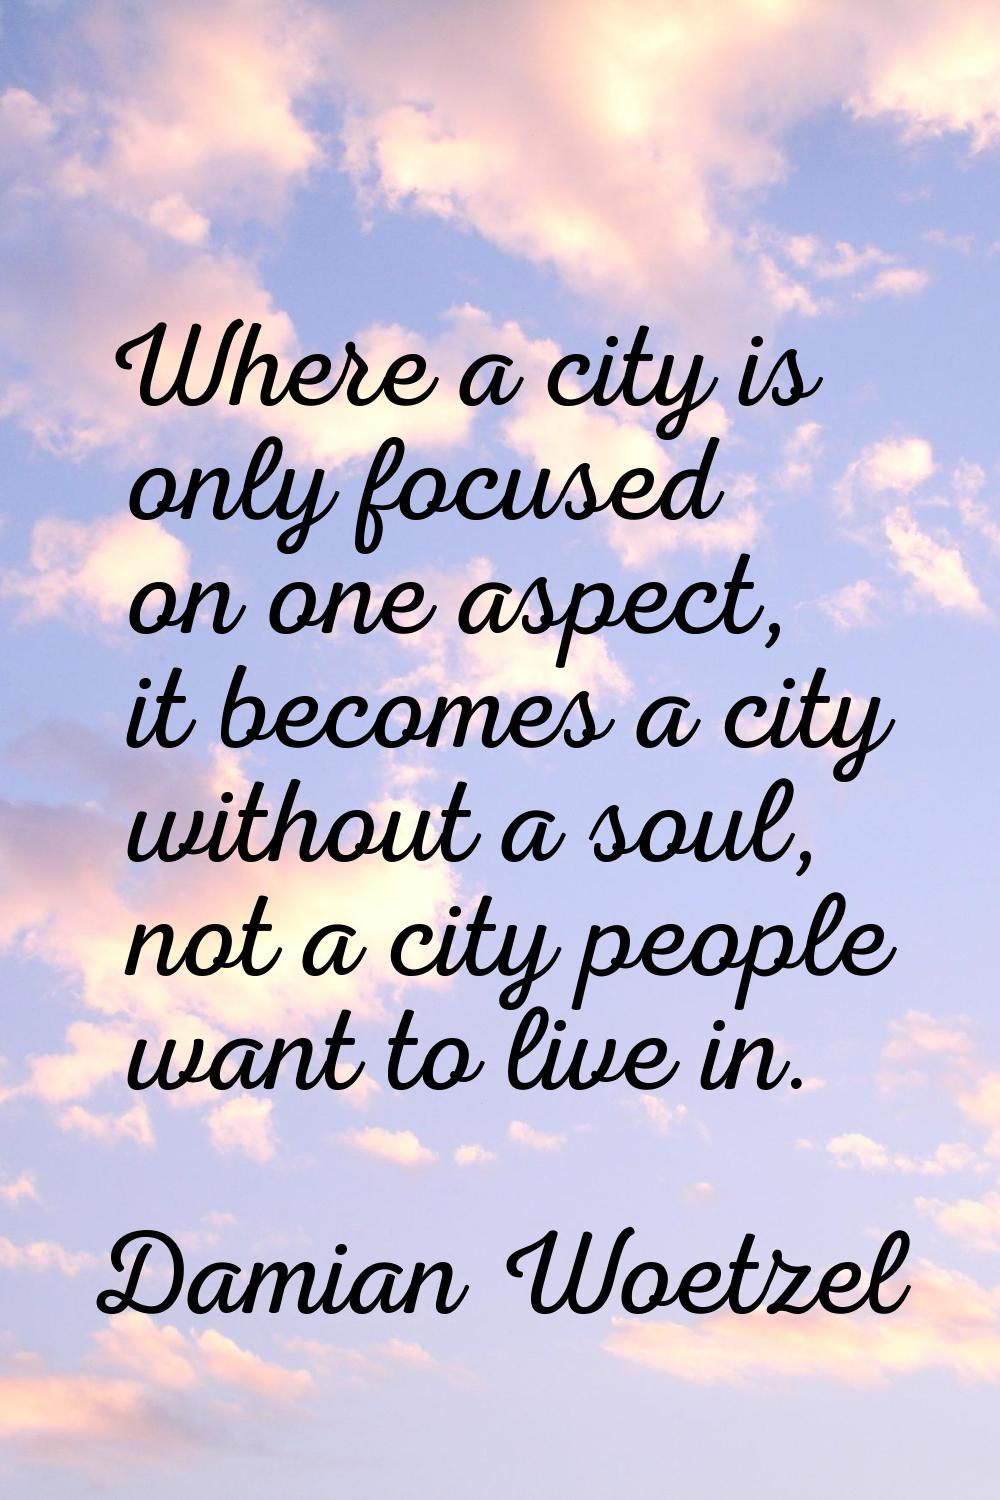 Where a city is only focused on one aspect, it becomes a city without a soul, not a city people wan